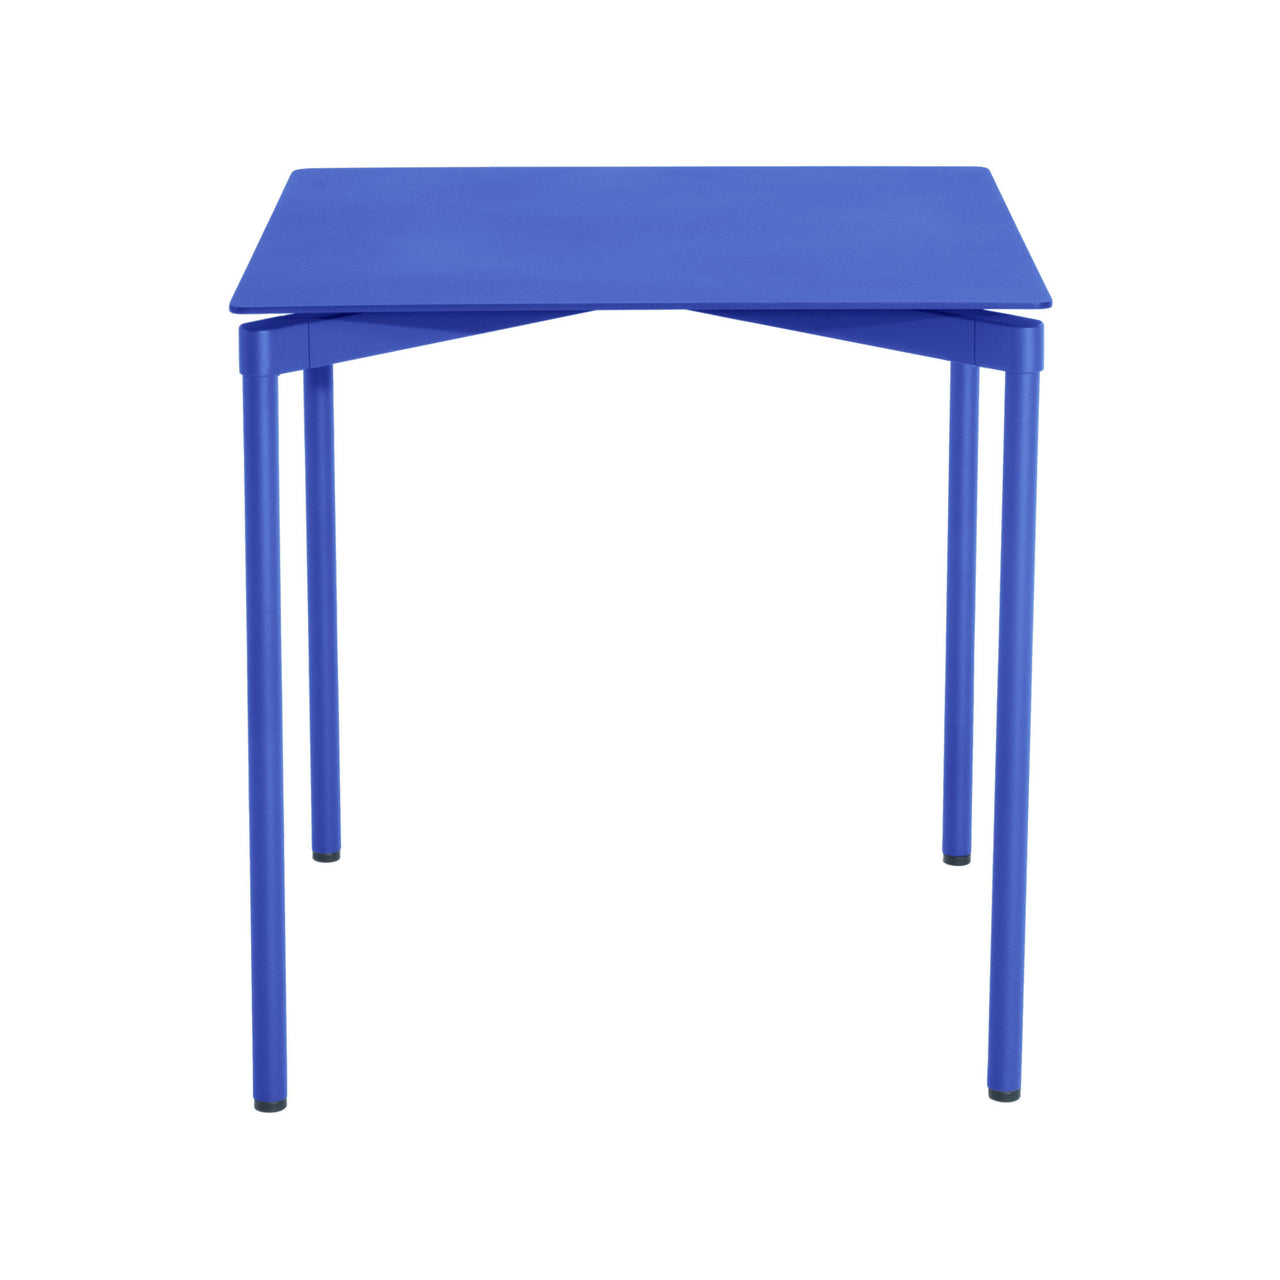 Fromme Dining Table: Square + Blue